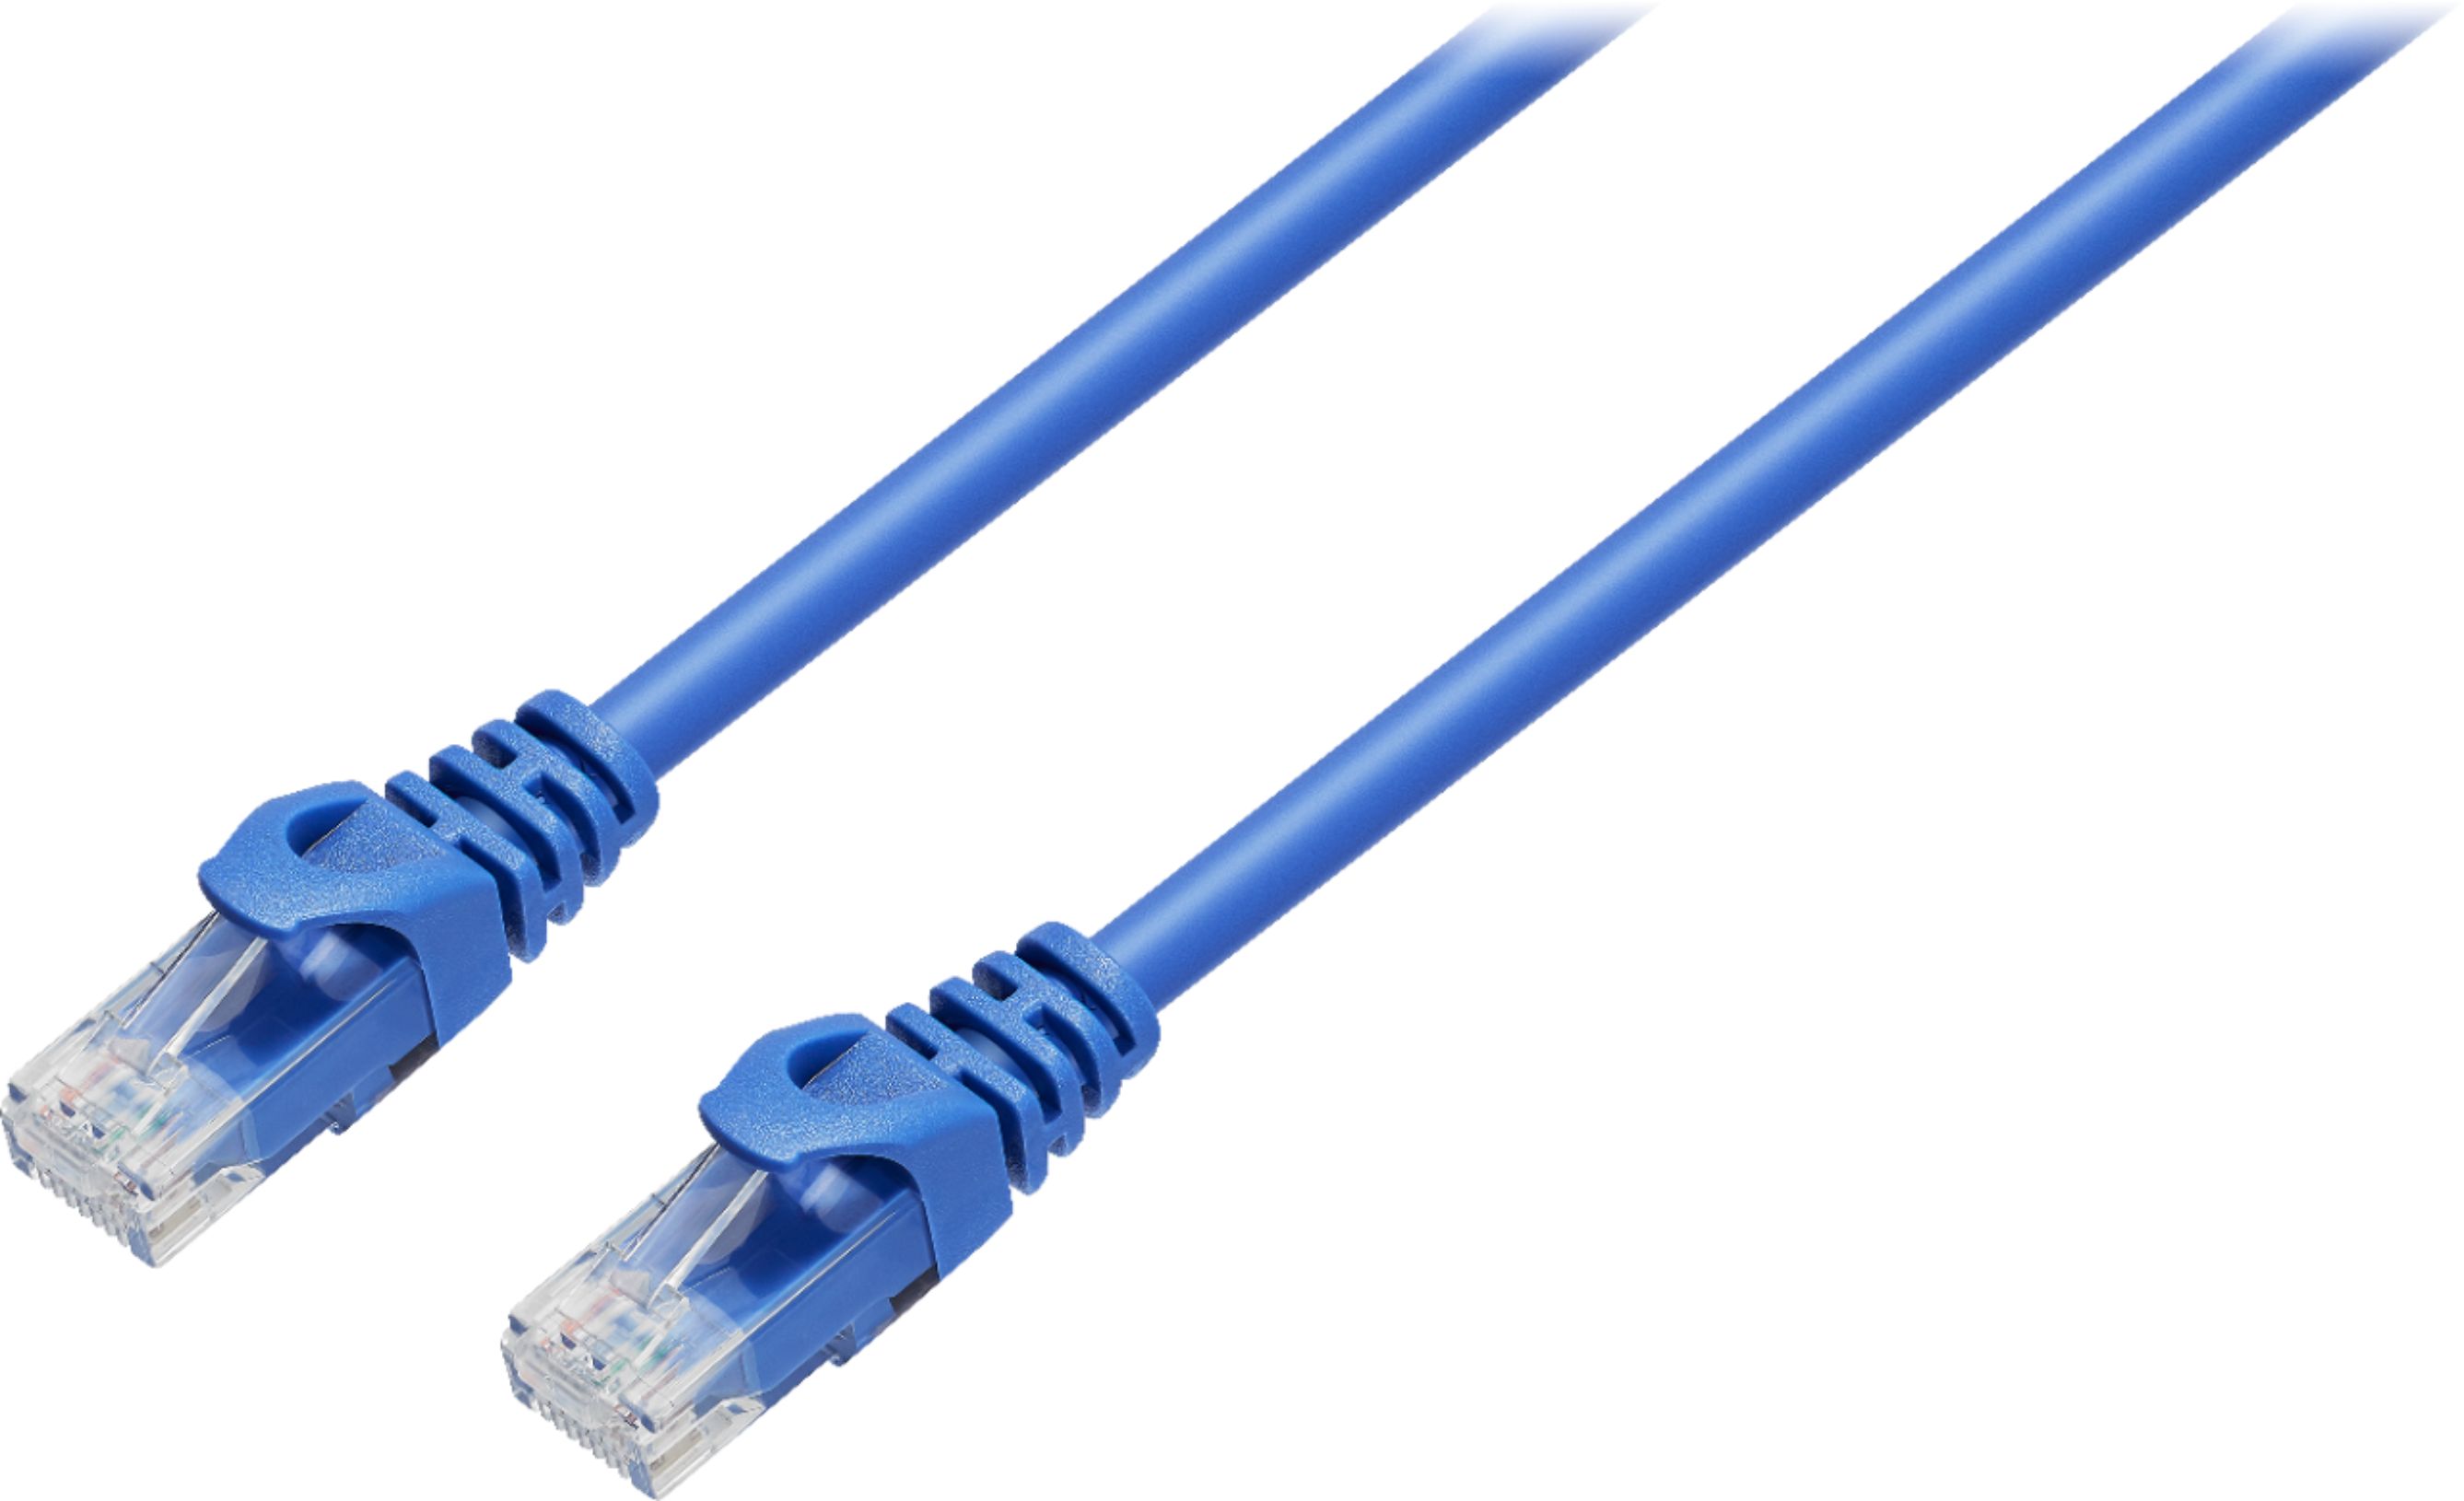 rj45 cable - Best Buy